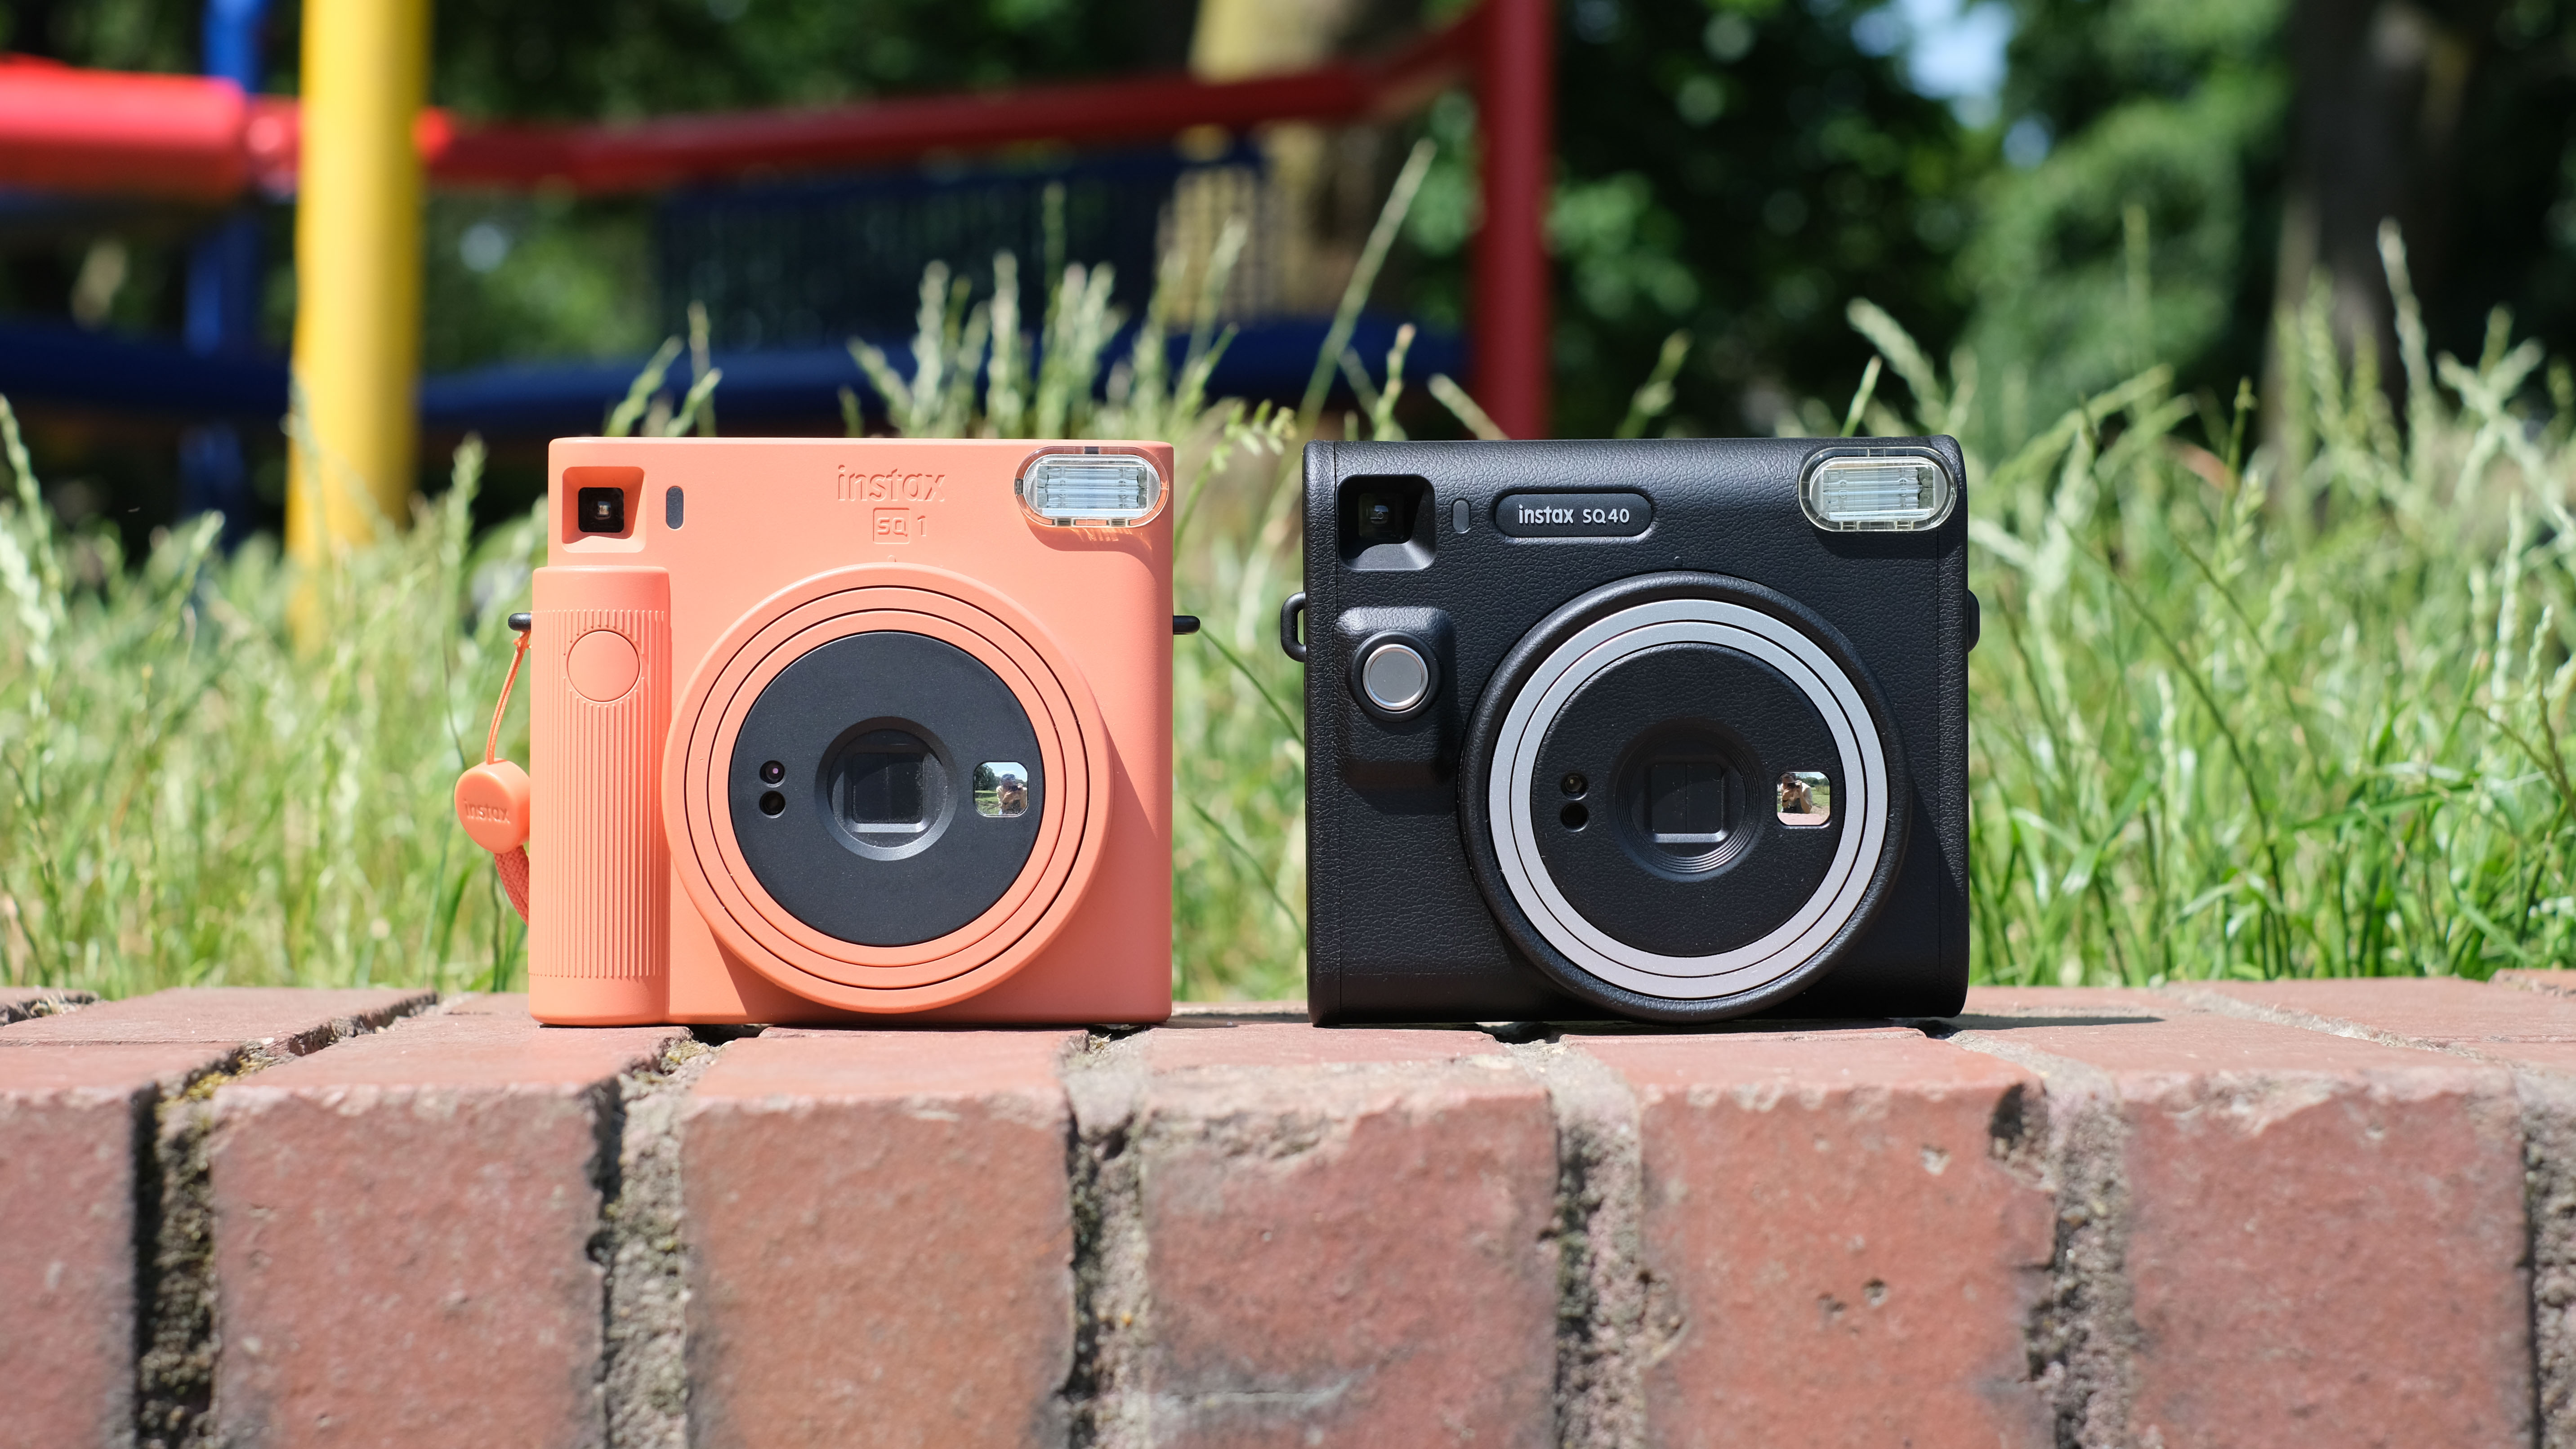 Comparison between the Instax Square SQ1 & SQ40 [GUIDE]